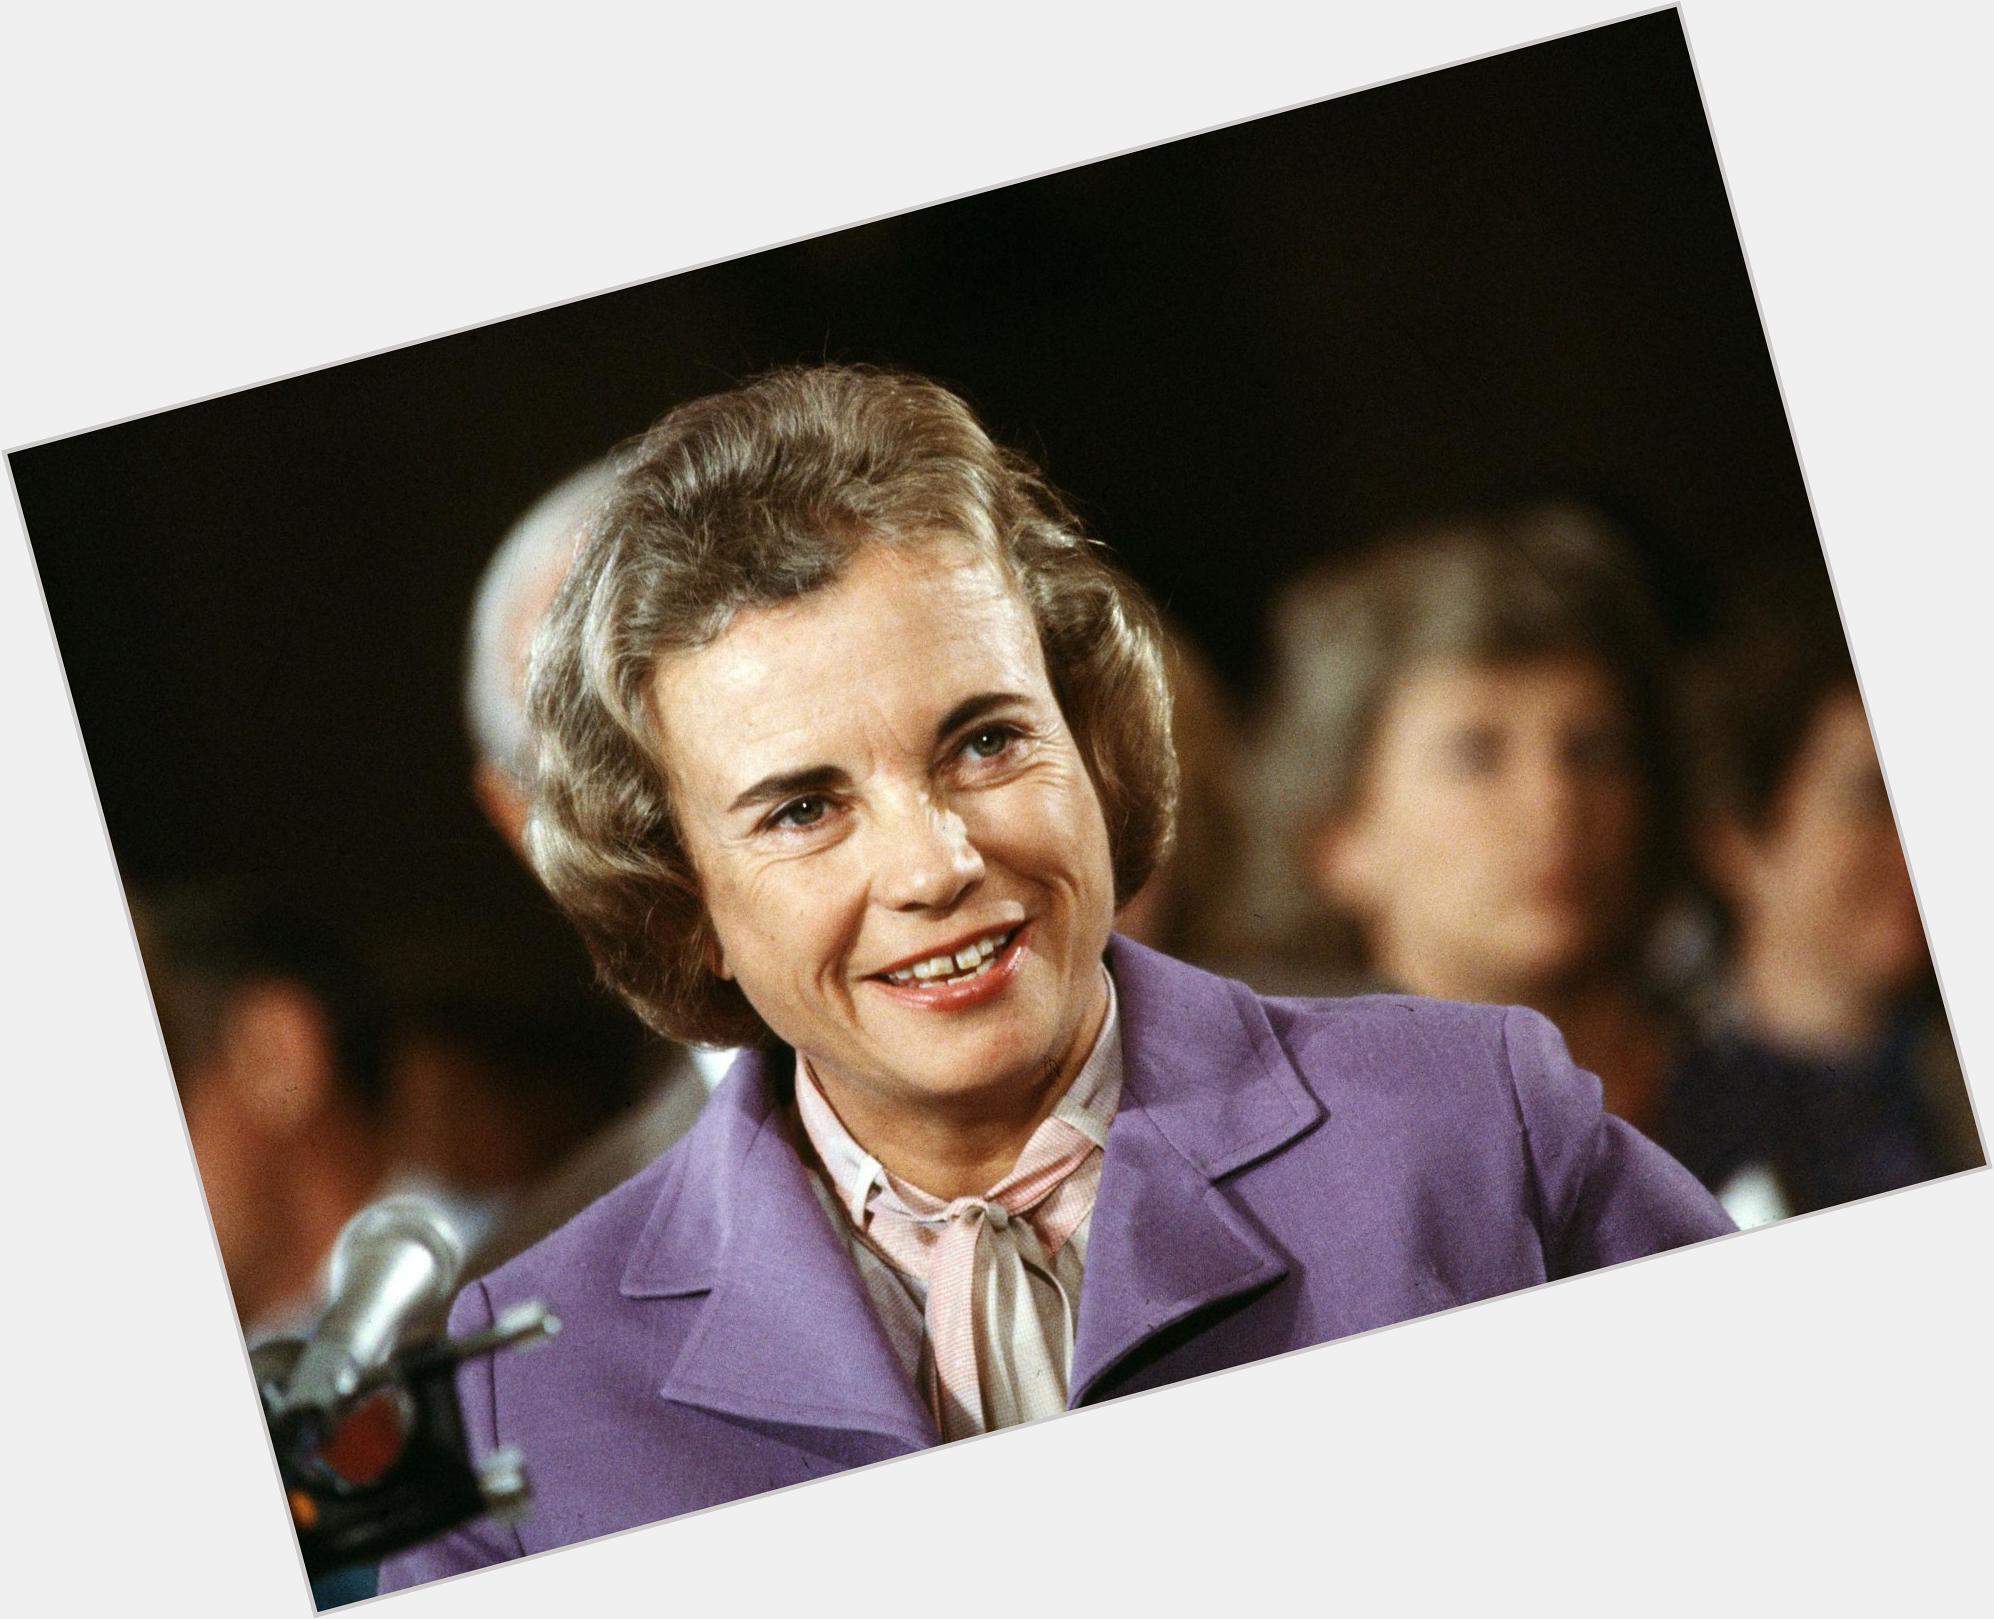 Http://fanpagepress.net/m/S/Sandra Day O Connor Dating 3